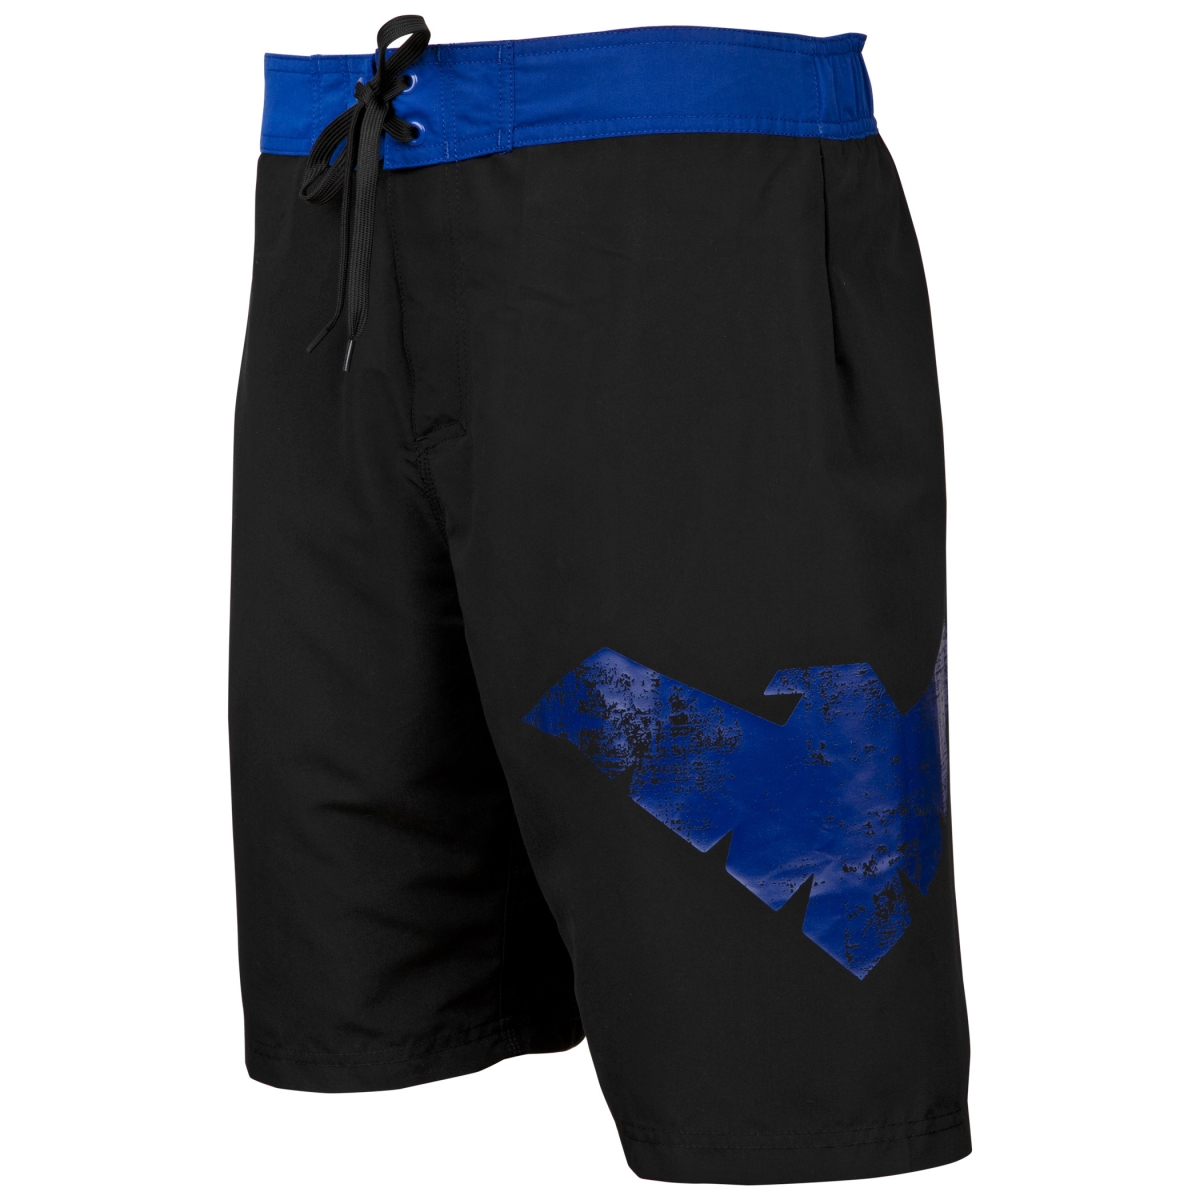 Picture of Nightwing 803533-small 28-30 Nightwing Symbol Board Shorts, Heather Black - Small 28-30